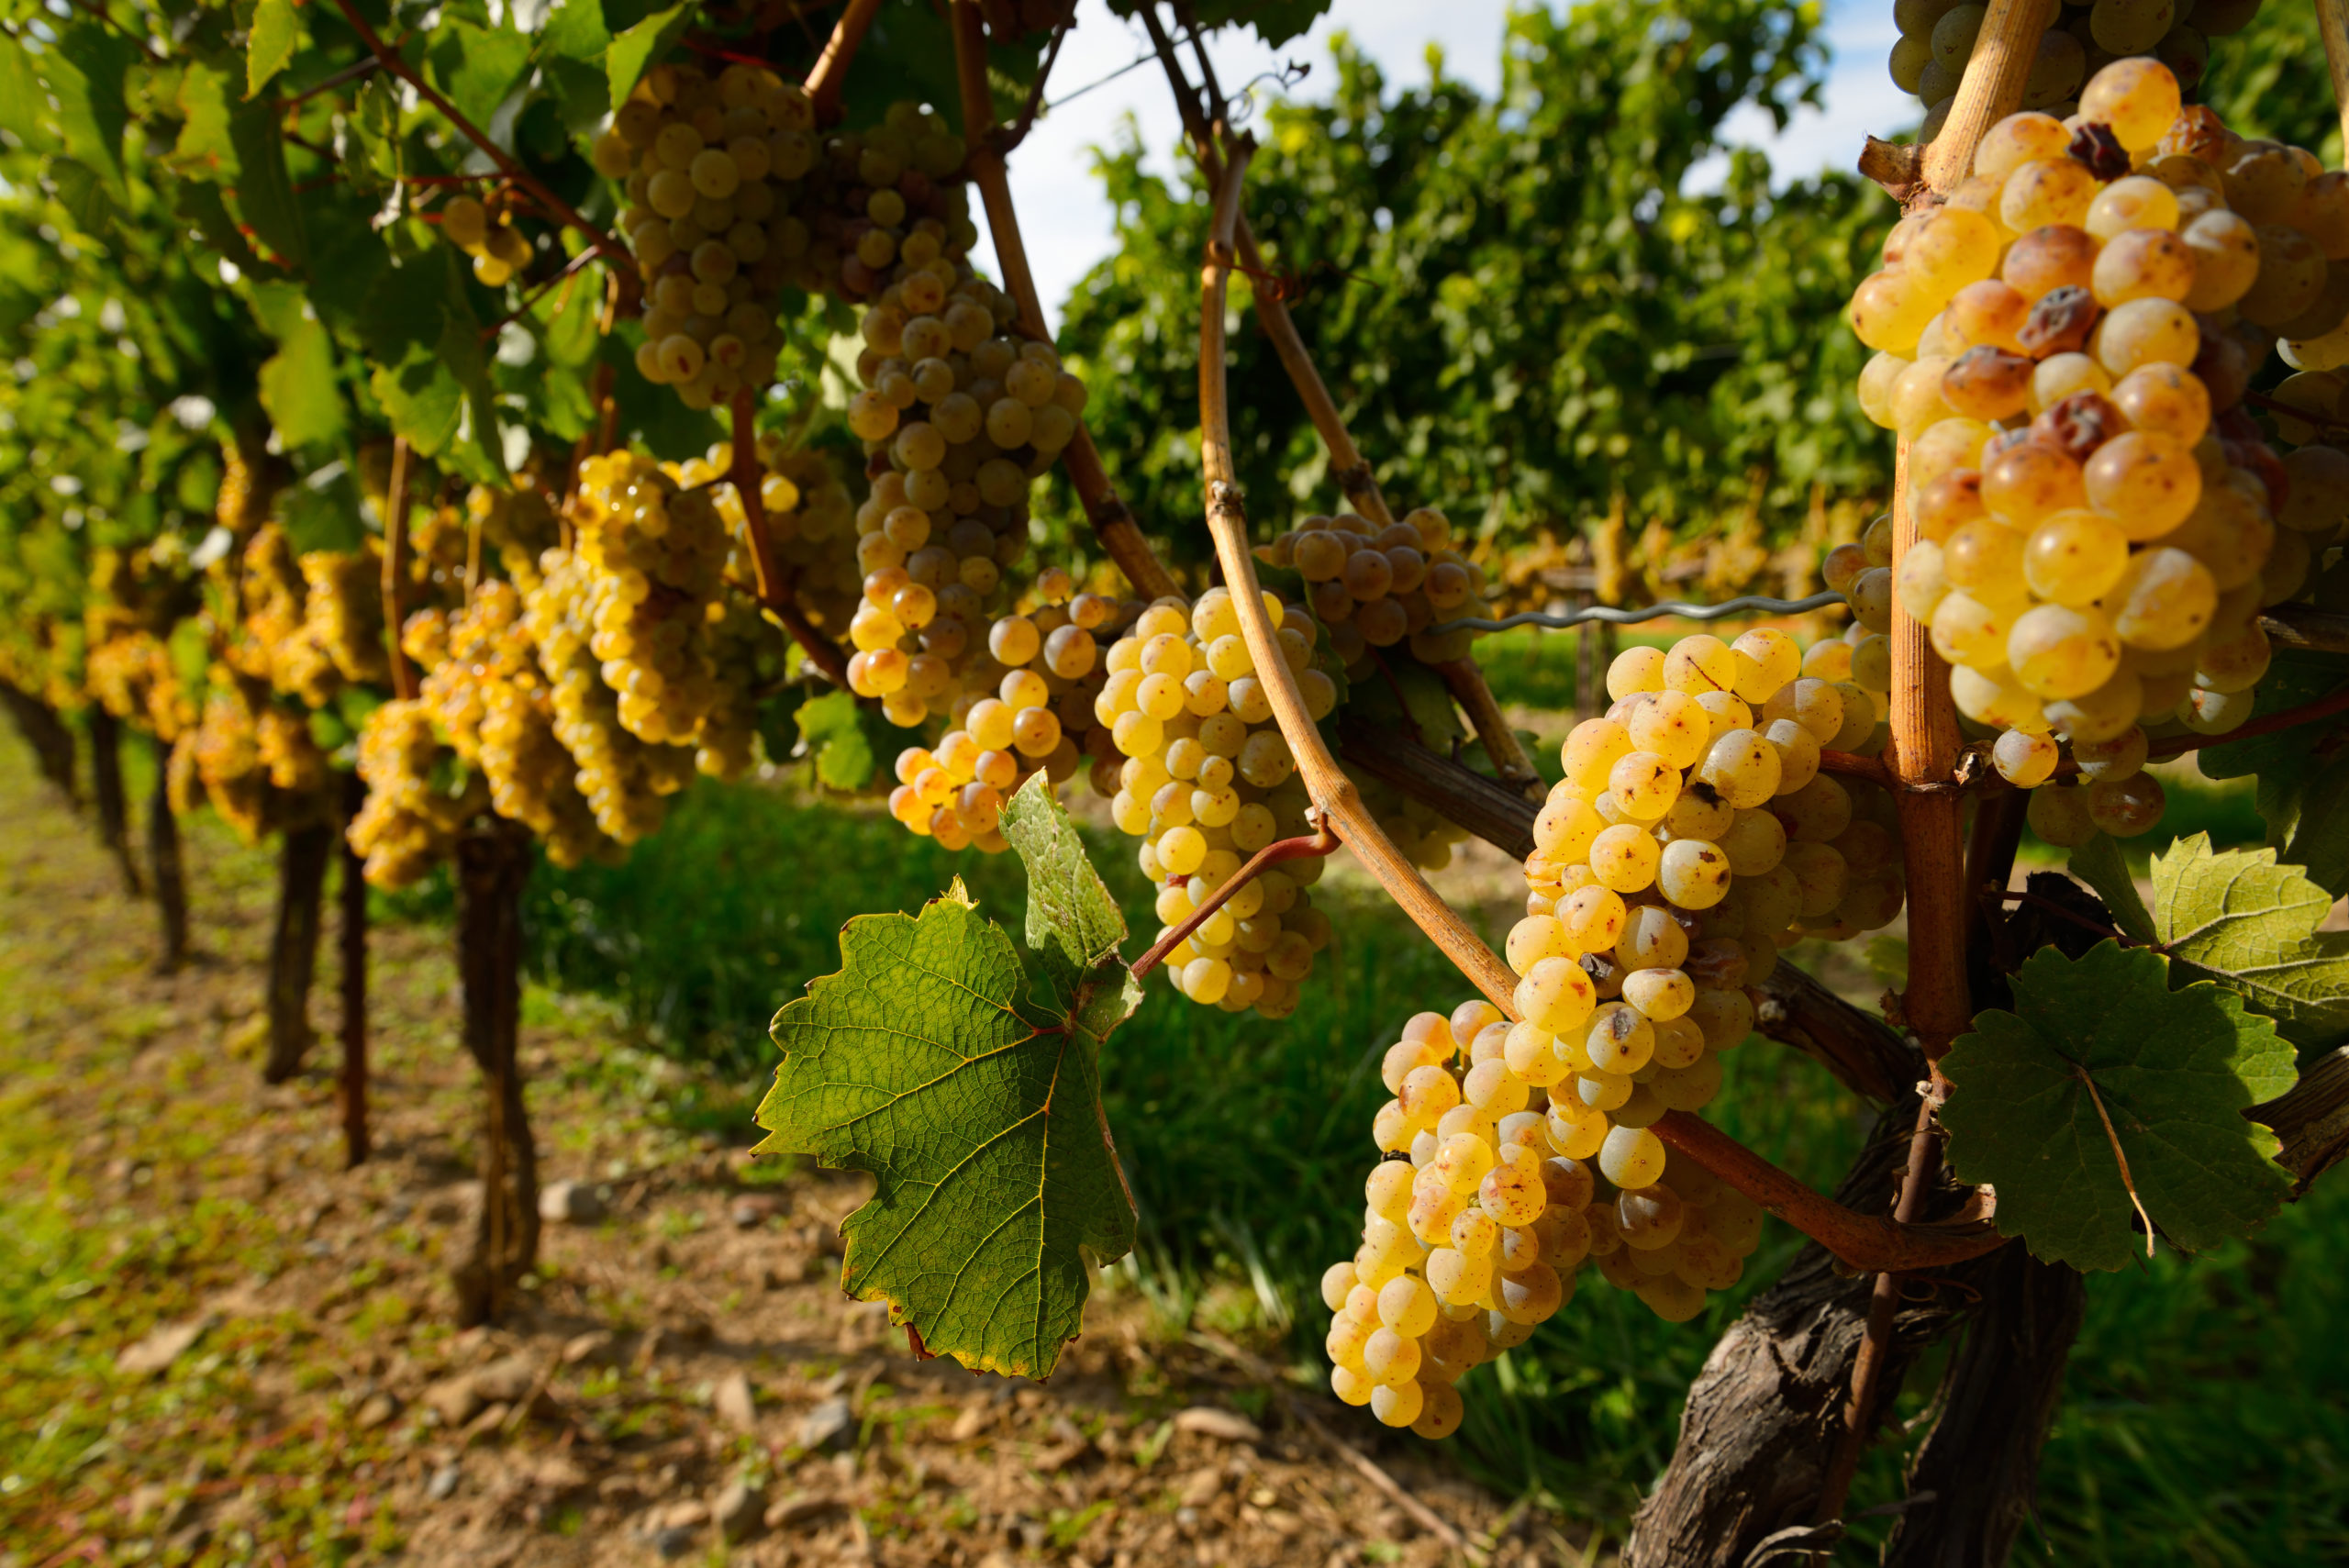 Golden Riesling grapes on rows of vines